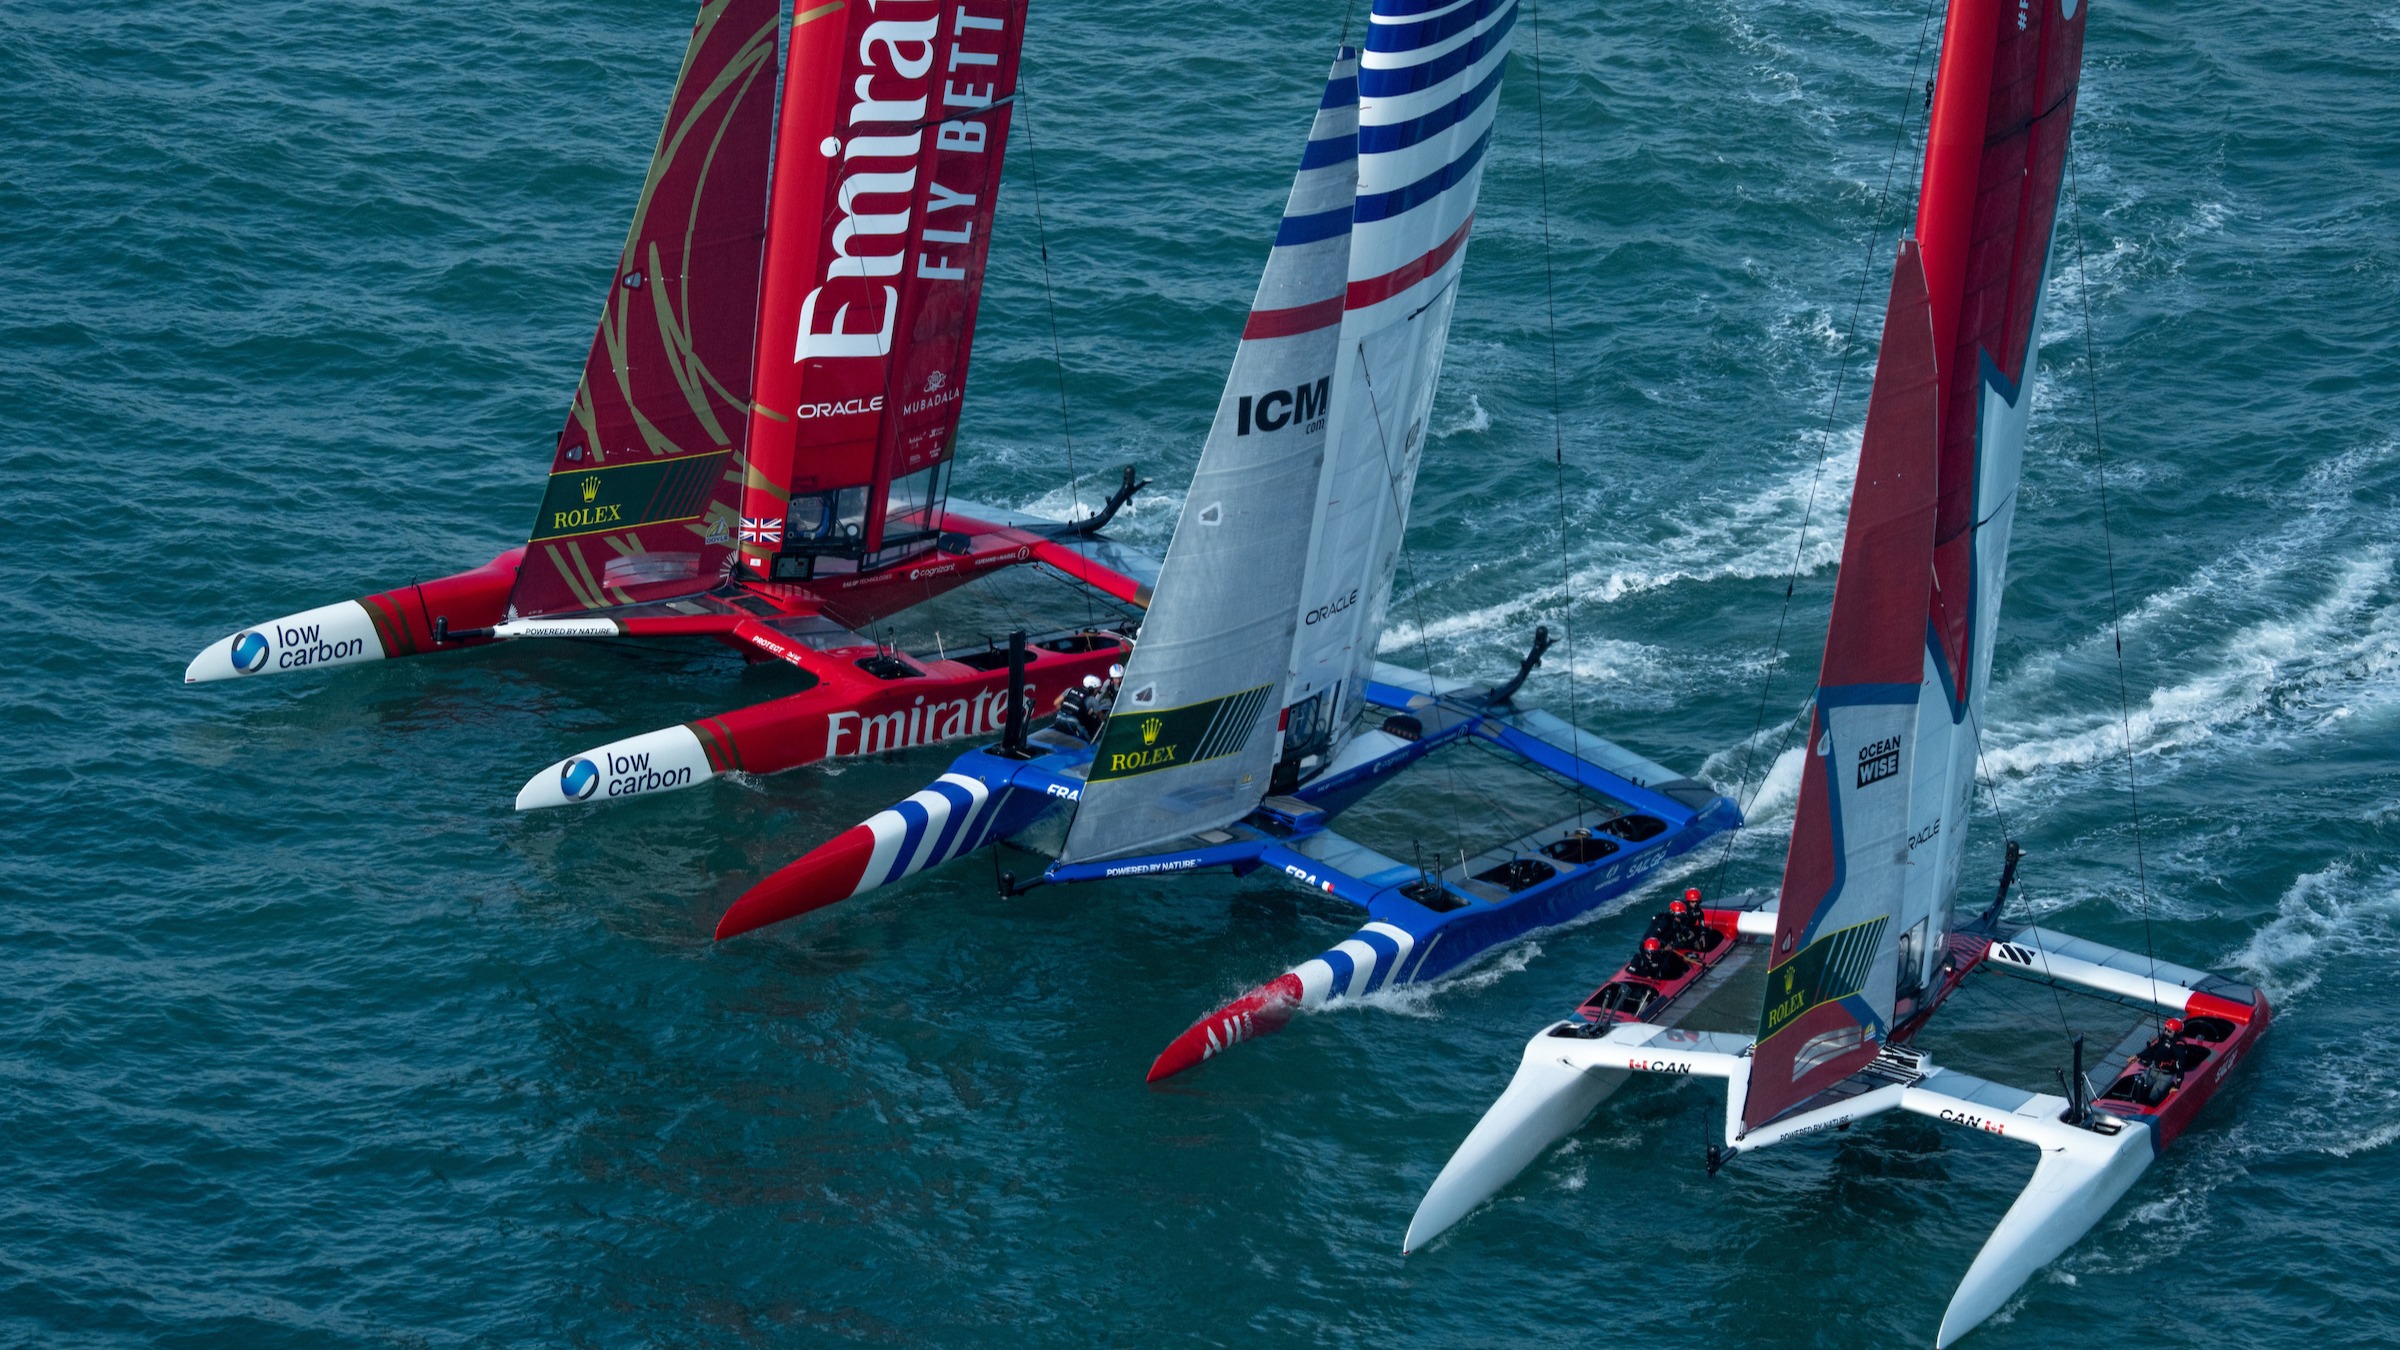 Season 4 // Tight moment between Emirates GBR, France and Canada in fleet race 1 in Cadiz